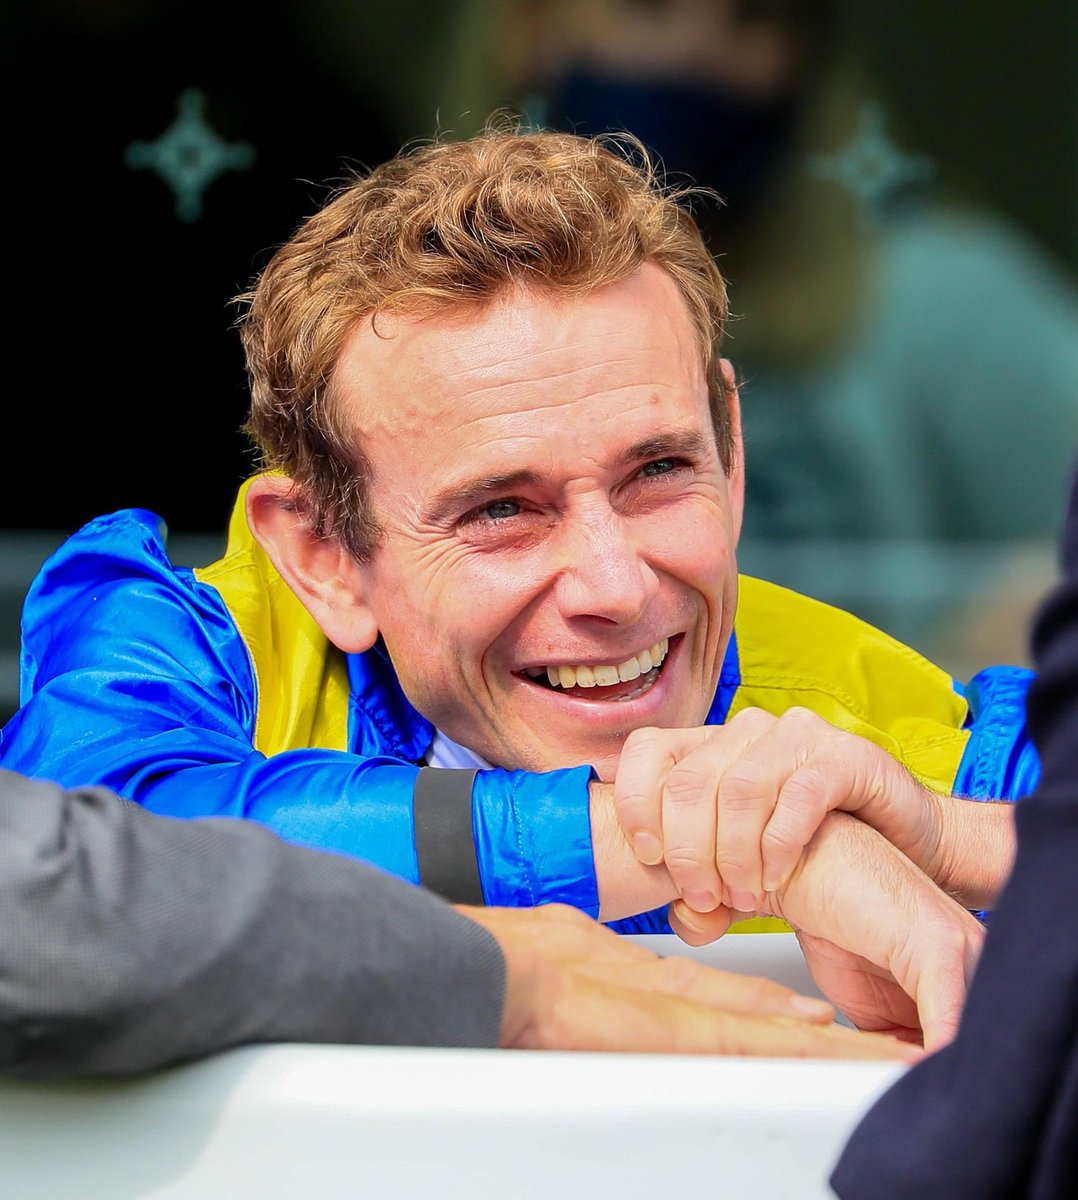 Loving life 😆 What do you reckon has made Ryan Moore chuckle here?